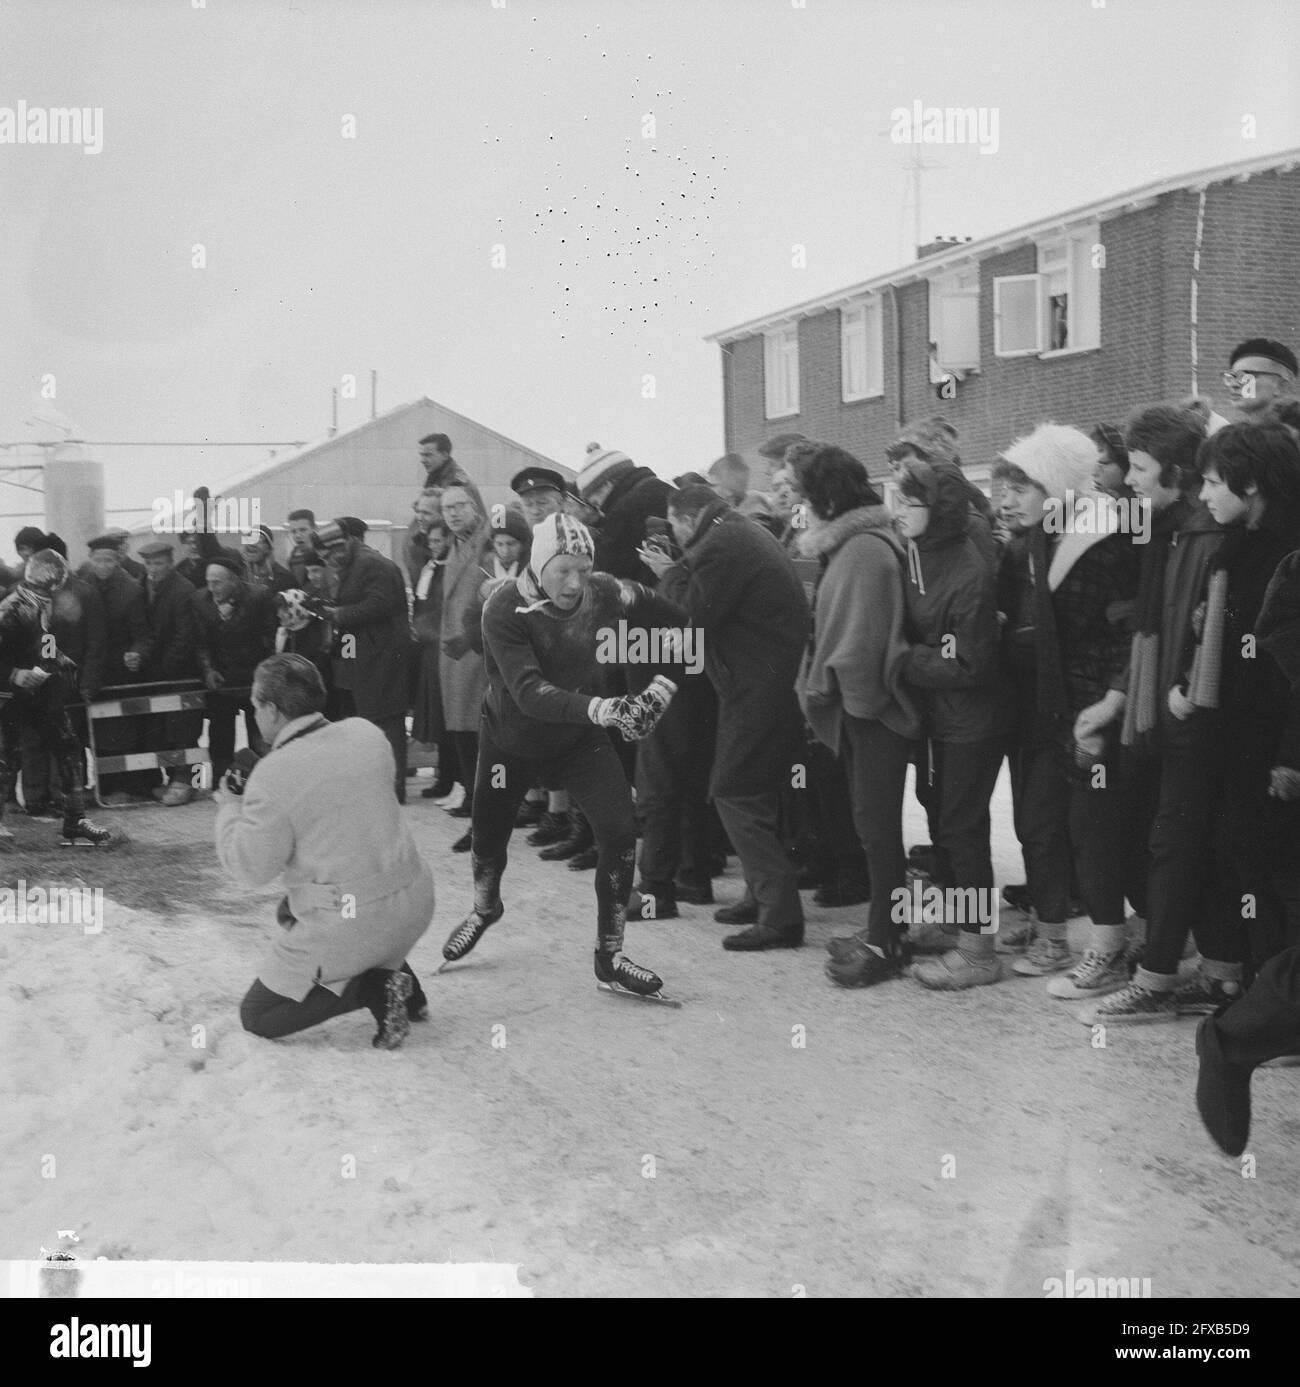 Elfstedentocht 1963, January 18, 1963, skating, sports, The Netherlands, 20th century press agency photo, news to remember, documentary, historic photography 1945-1990, visual stories, human history of the Twentieth Century, capturing moments in time Stock Photo